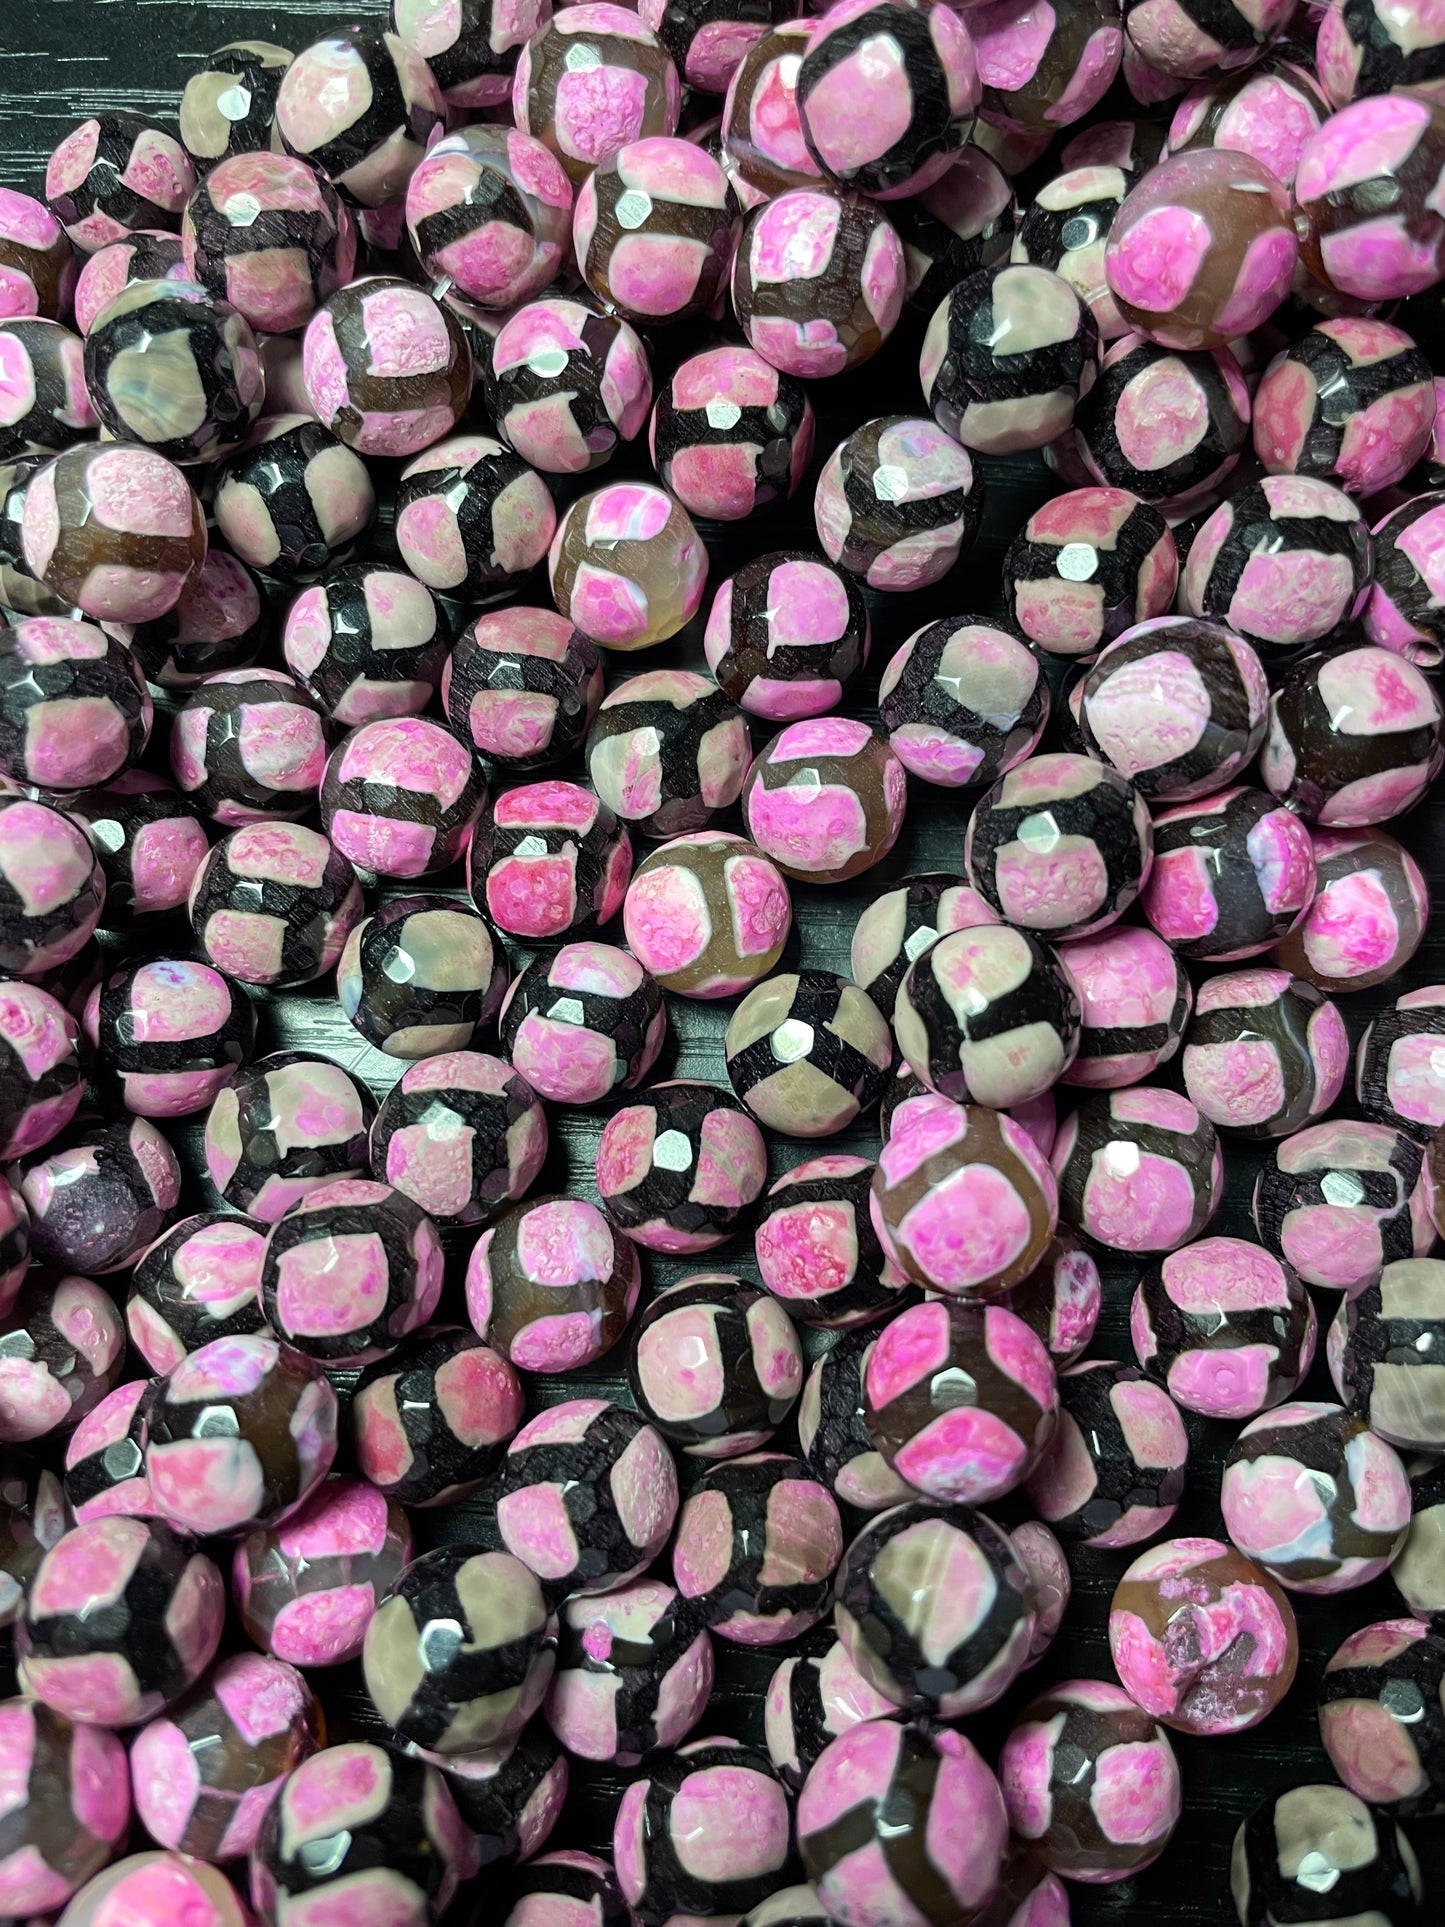 10mm/12mm Pink Faceted Tibetan Agate Stone Beads Stone Beads 12mm Stone Beads Tibetan Beads Charms Beads Beyond